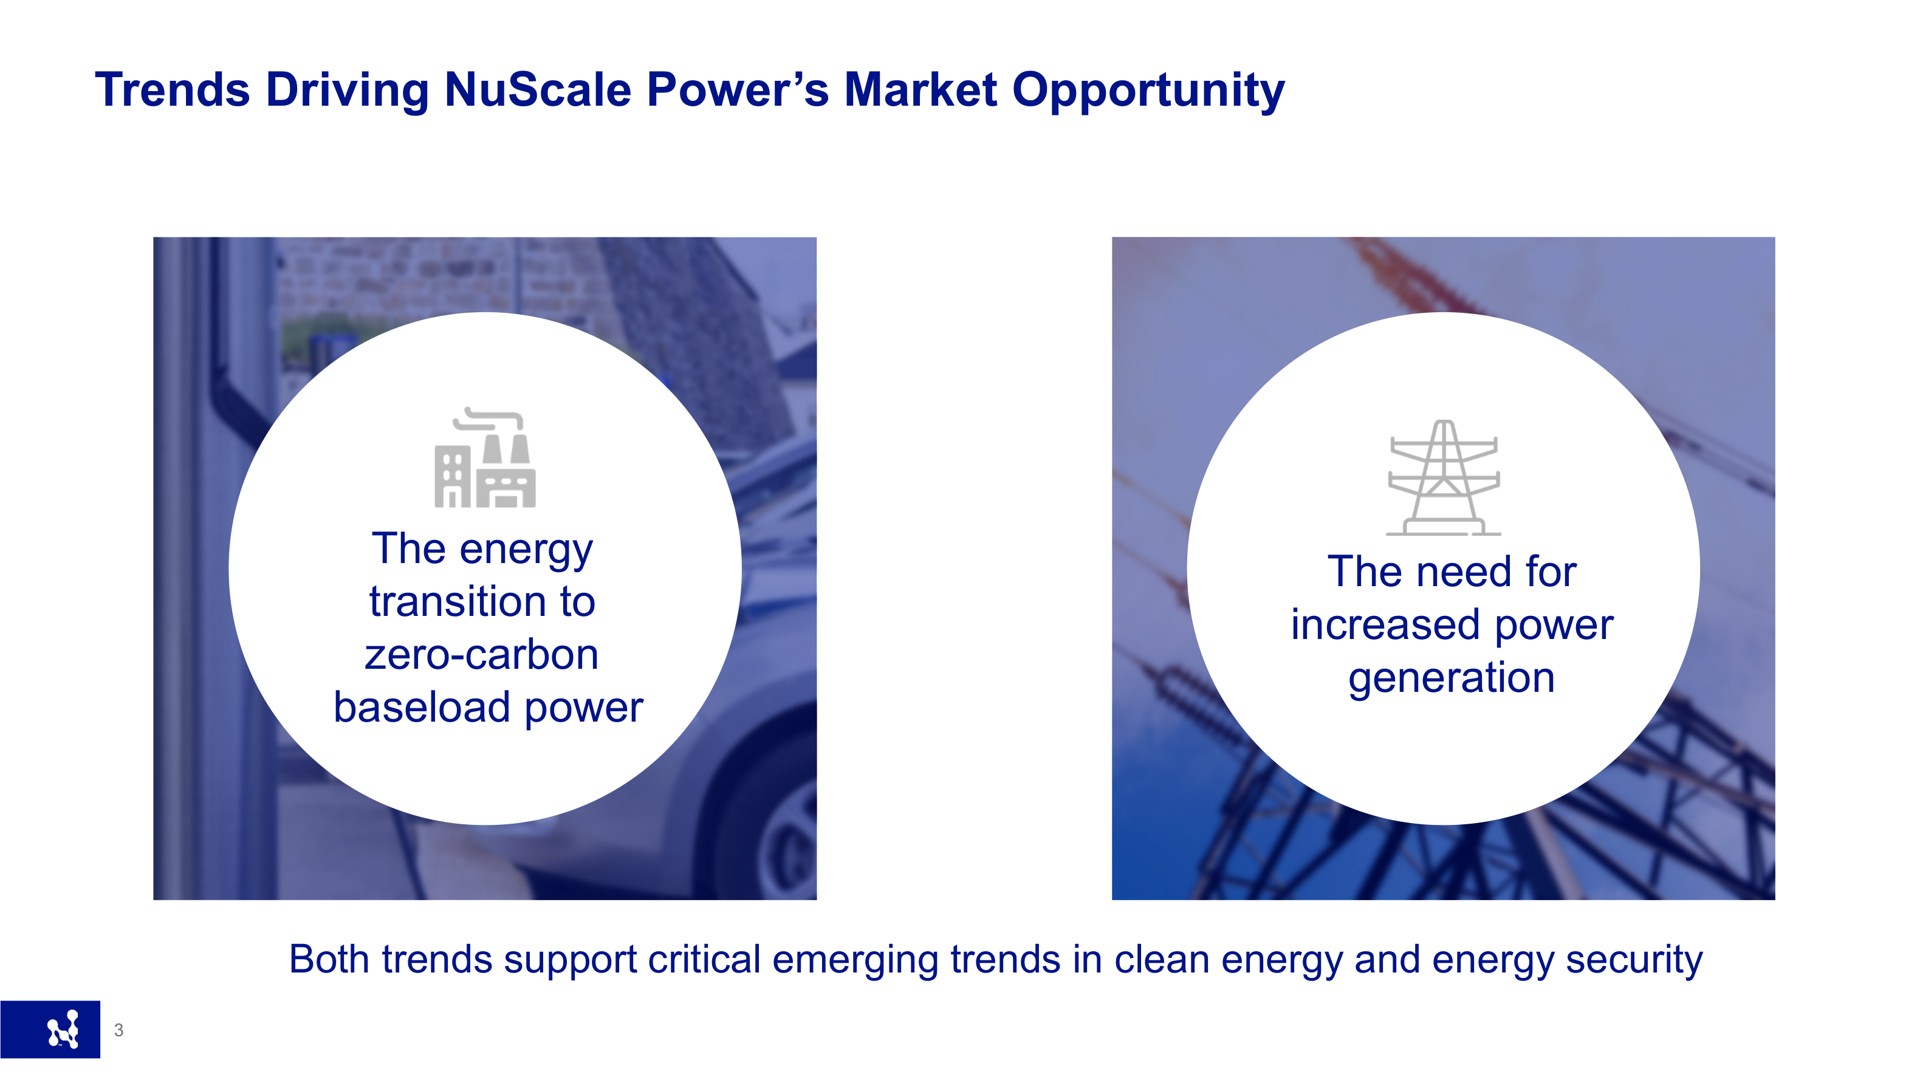 trends driving power market opportunity the energy transition to zero carbon power the need for increased power generation both support critical emerging in clean and security i | Nuscale